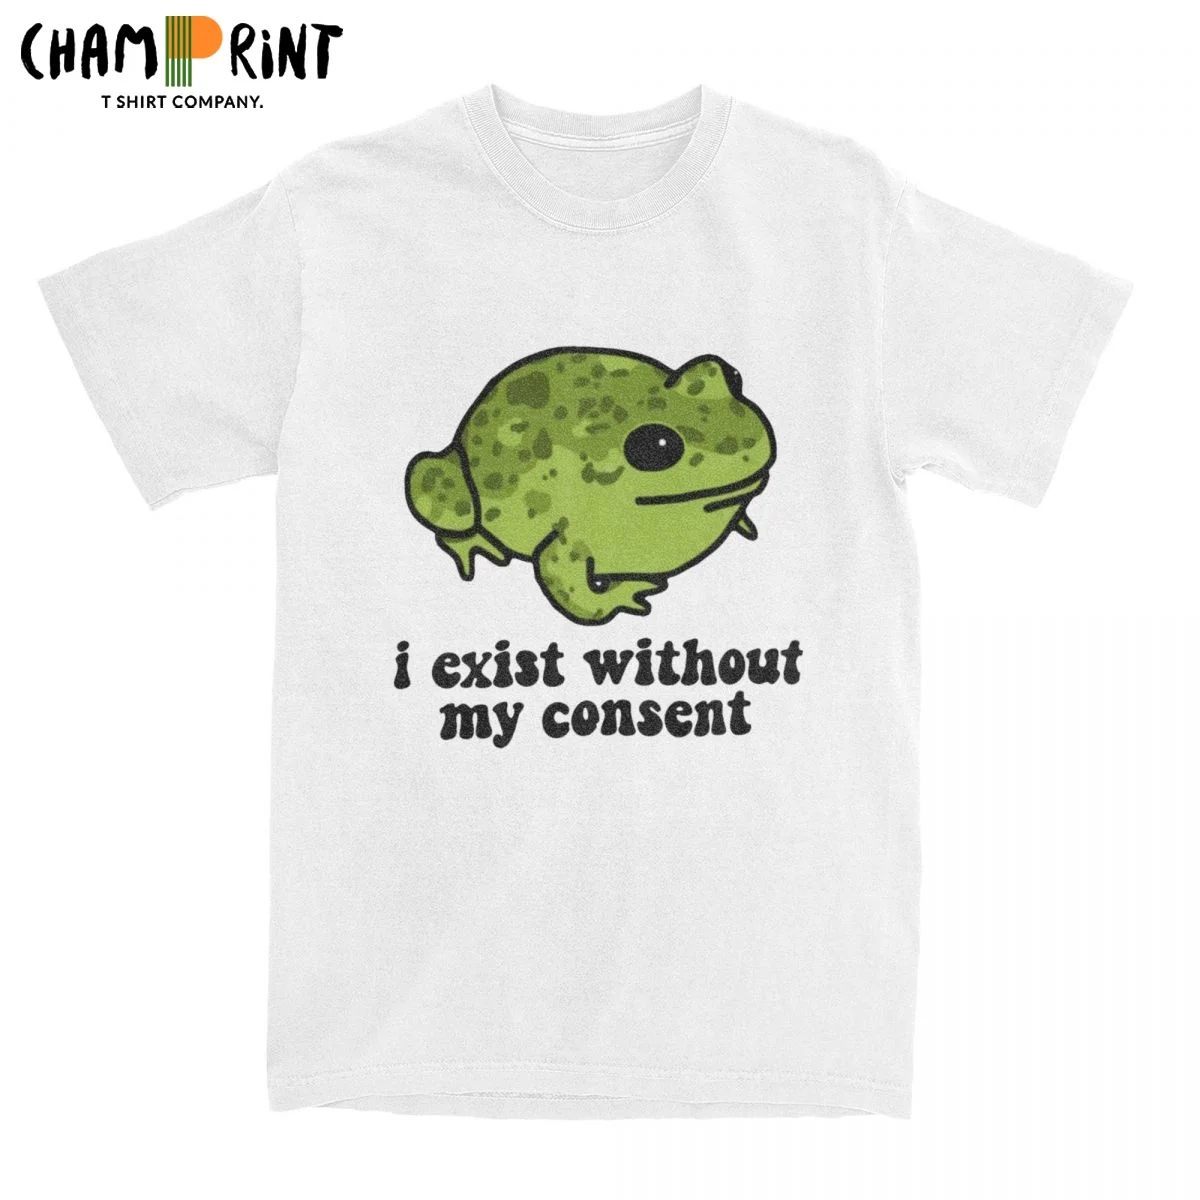 Novelty I Exist Without My Consent Frog T-Shirts for Men Round Neck Cotton T Shirts Short Sleeve Tee Shirt Summer Tops